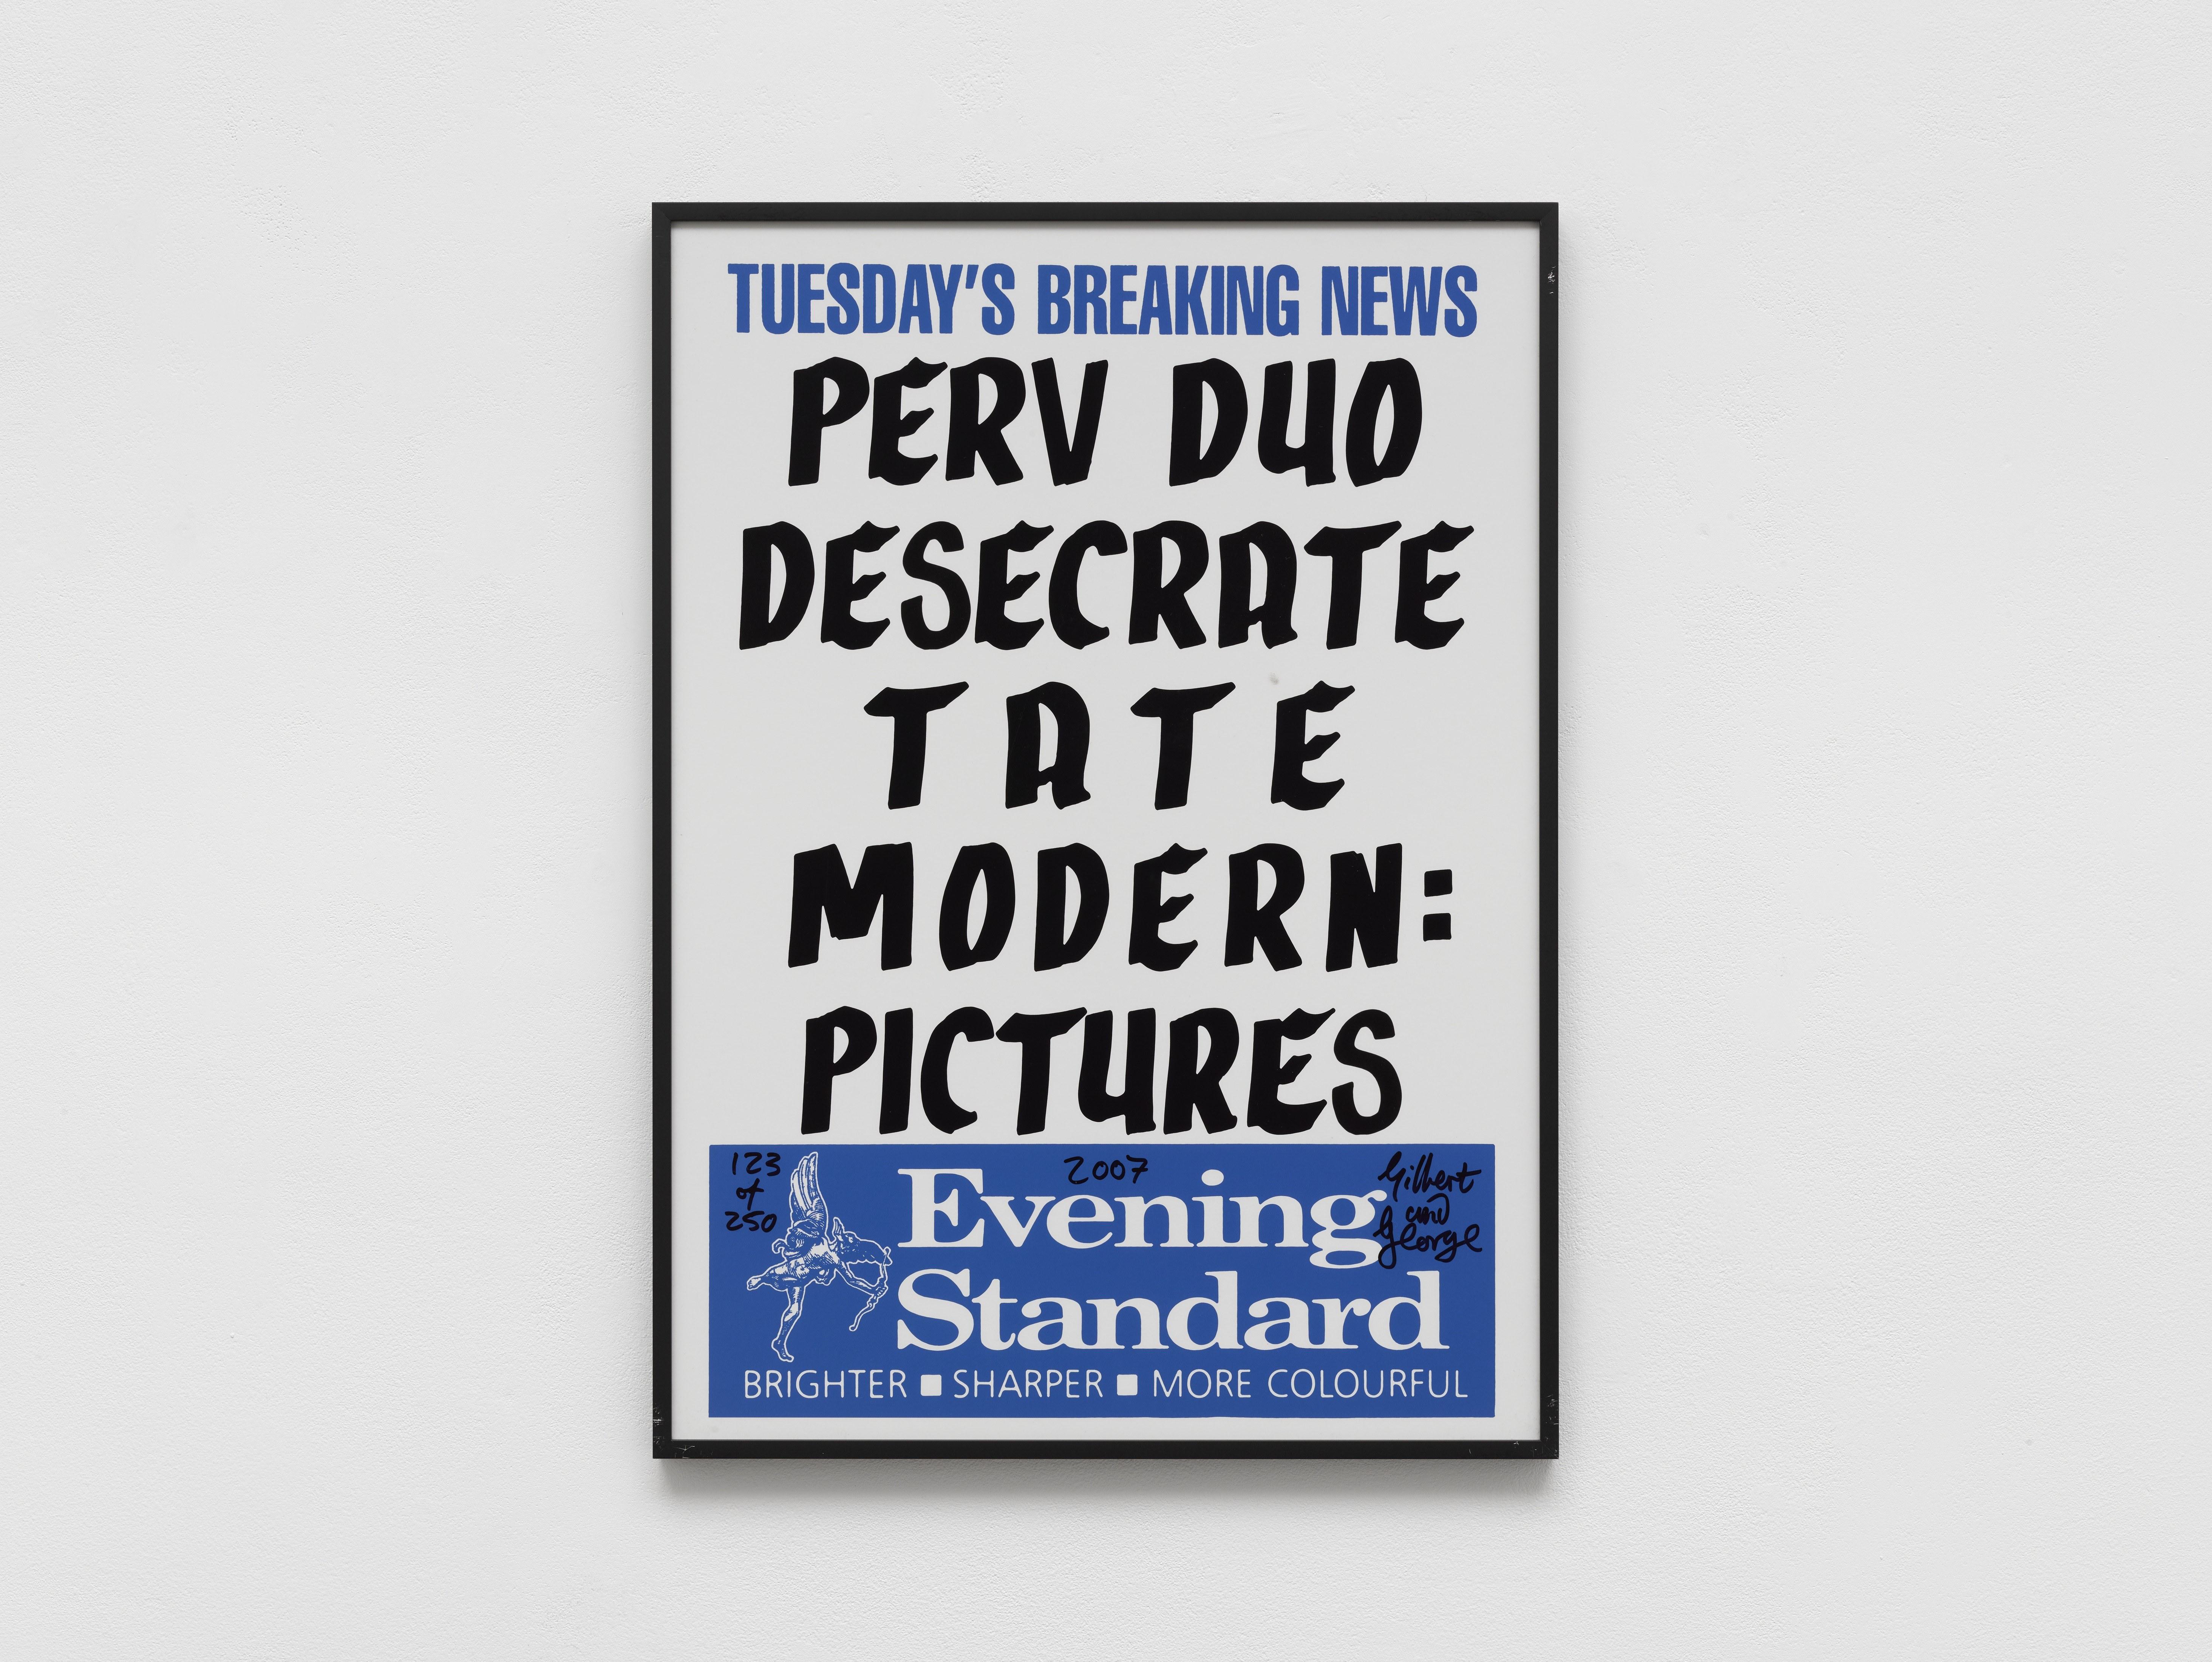 Gilbert & George - Perv Duo Desecrate Tate Modern: Pictures - 1